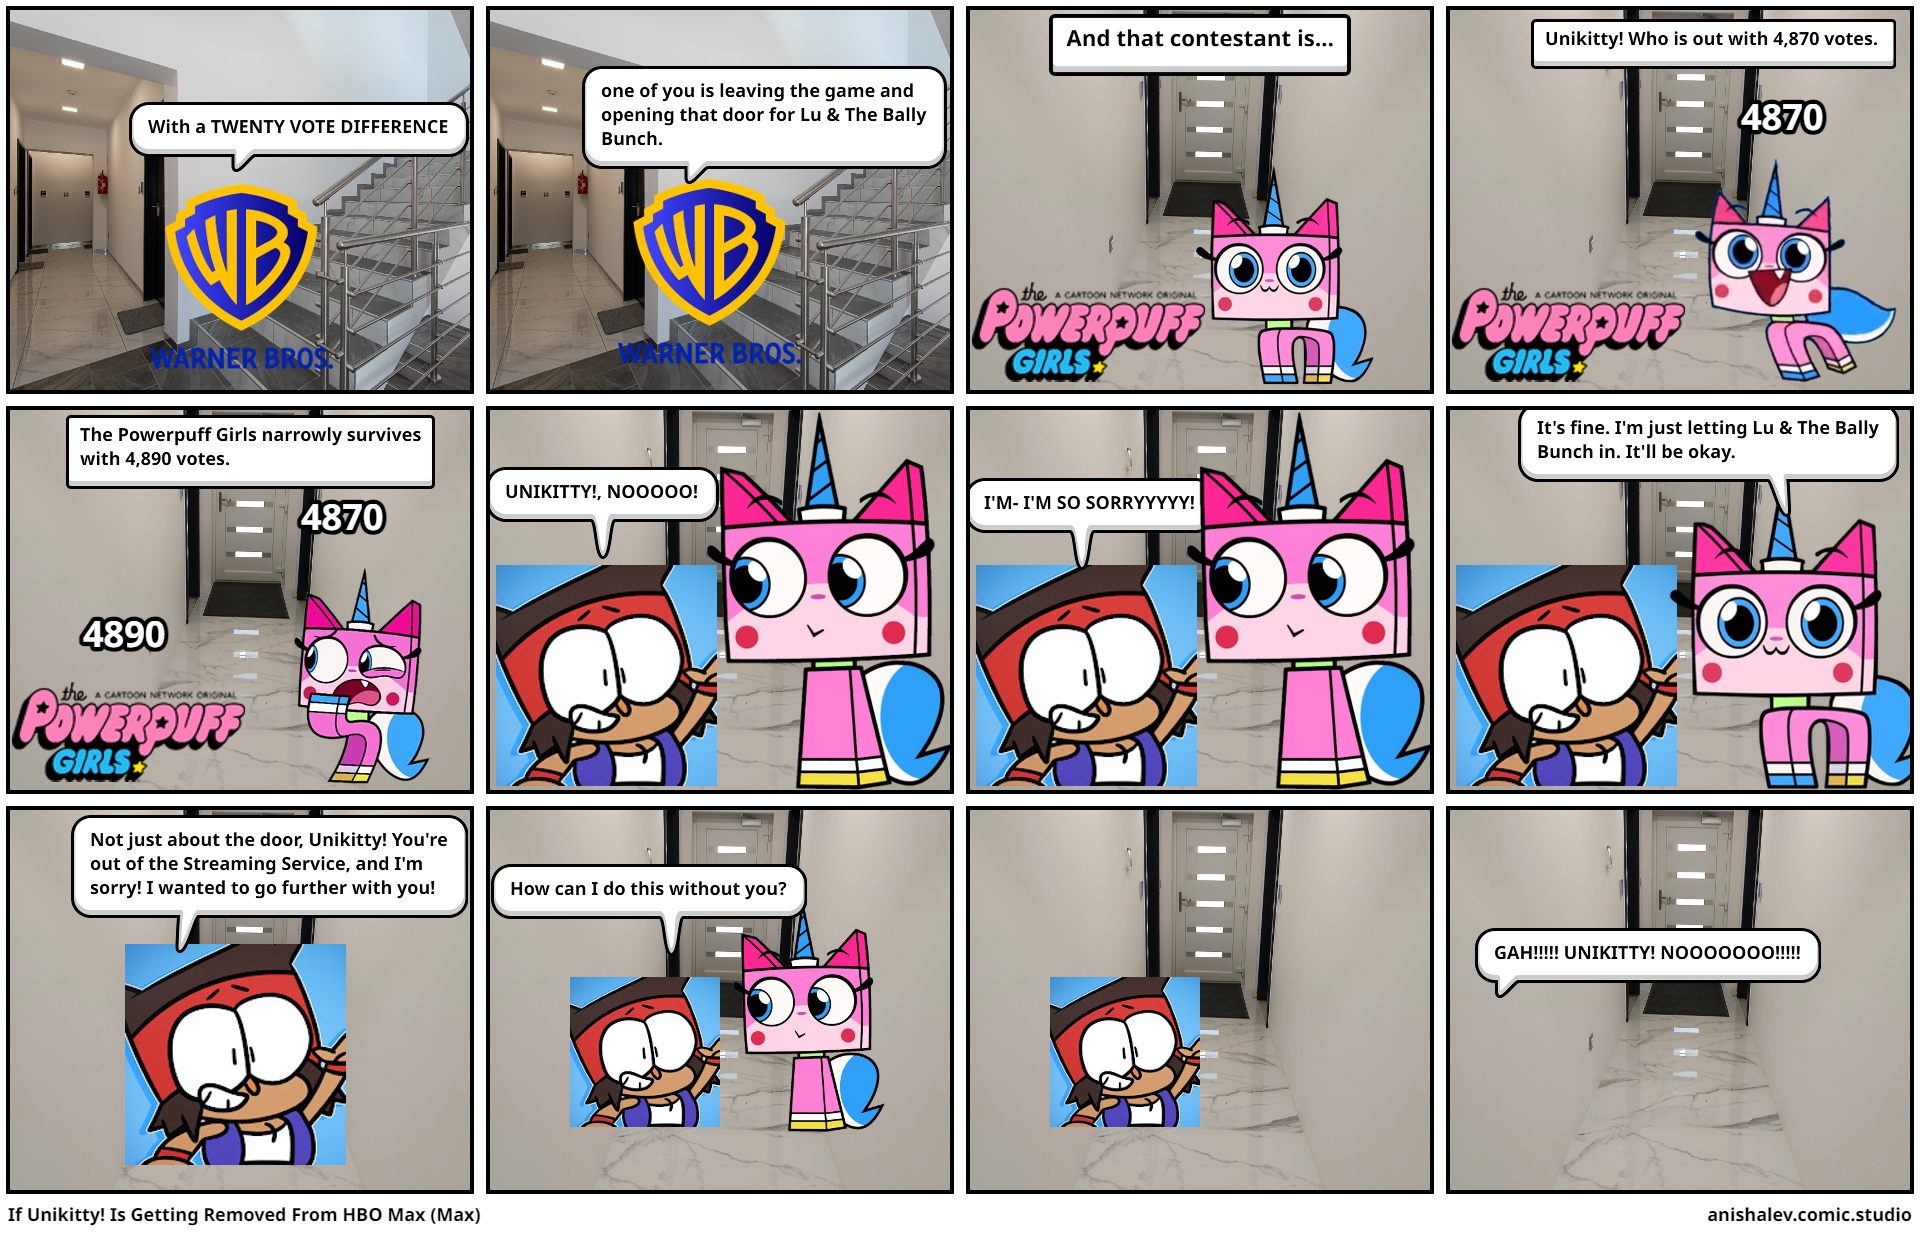 If Unikitty! Is Getting Removed From HBO Max (Max)